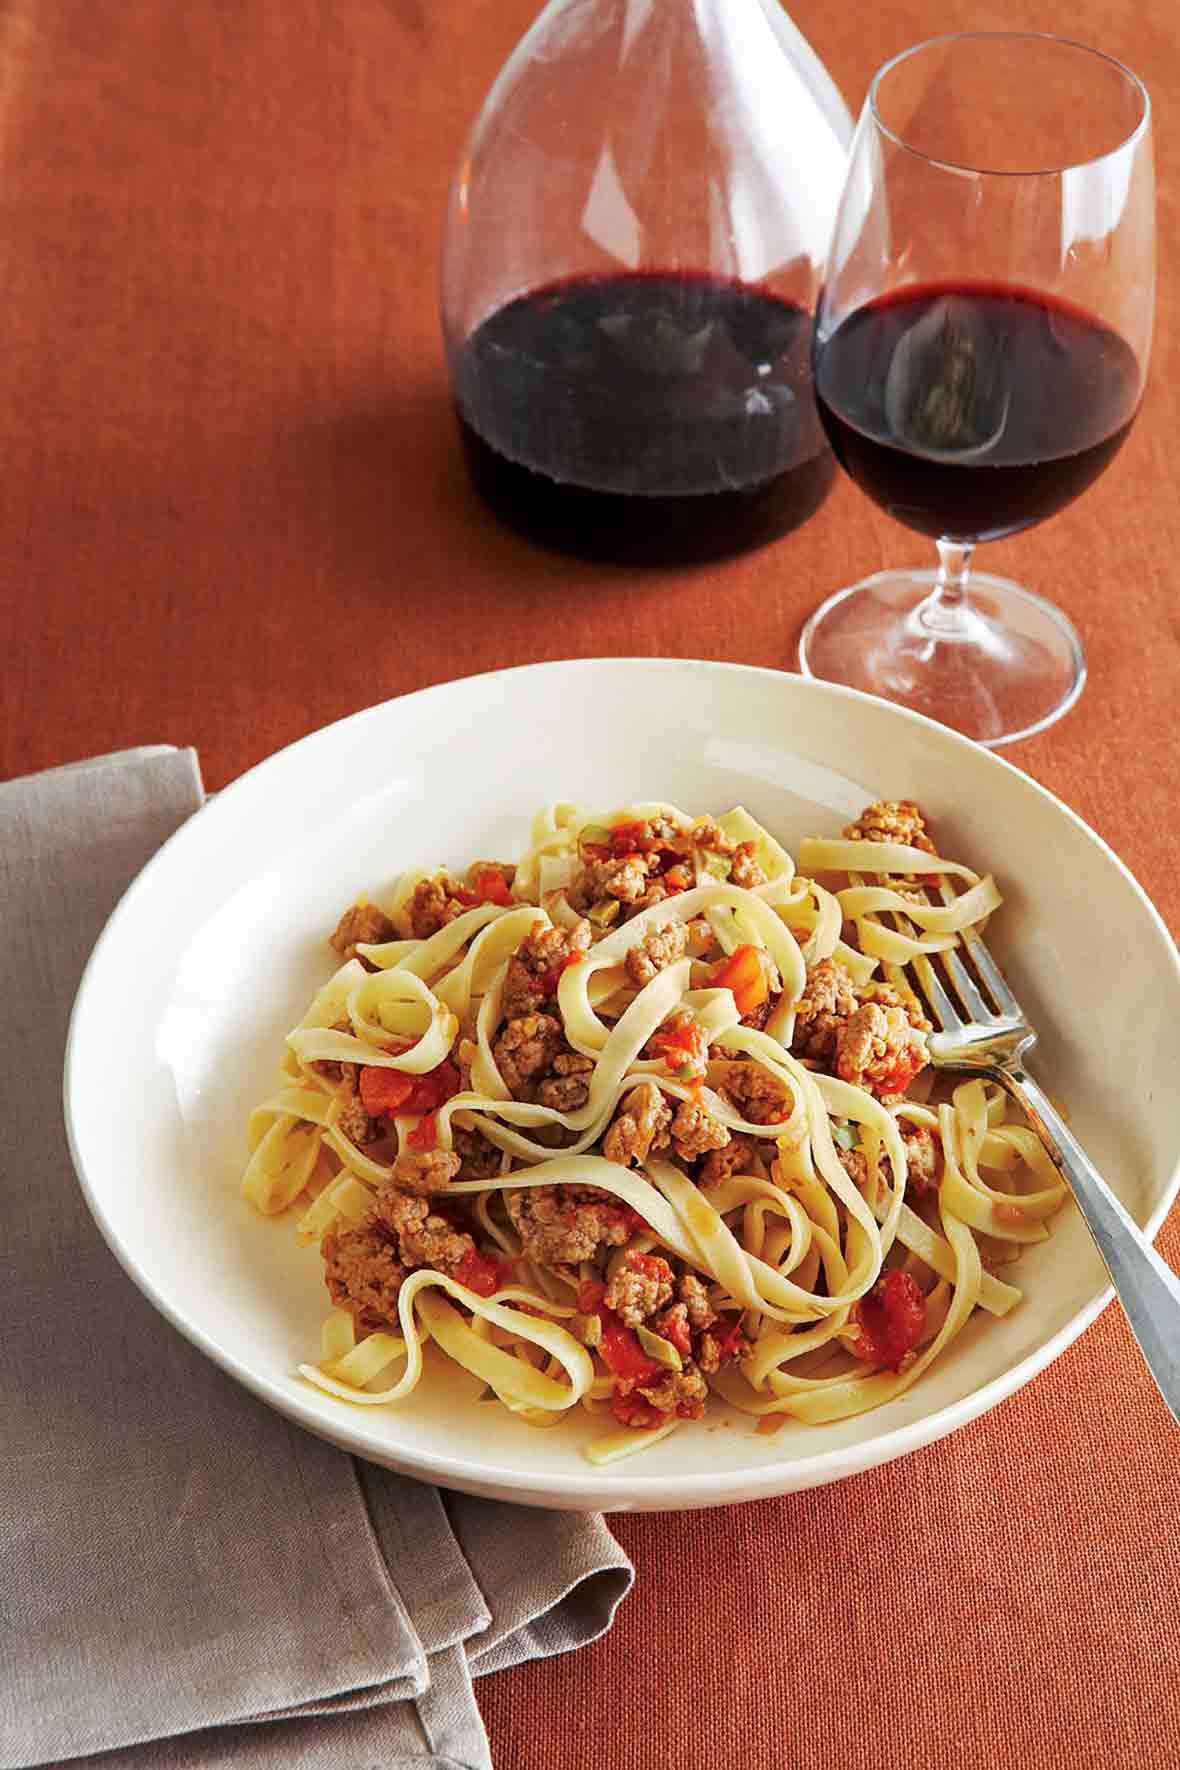 A wide white bowl filled with fettuccine with a savory veal sauce and a carafe and glass of wine in the background.